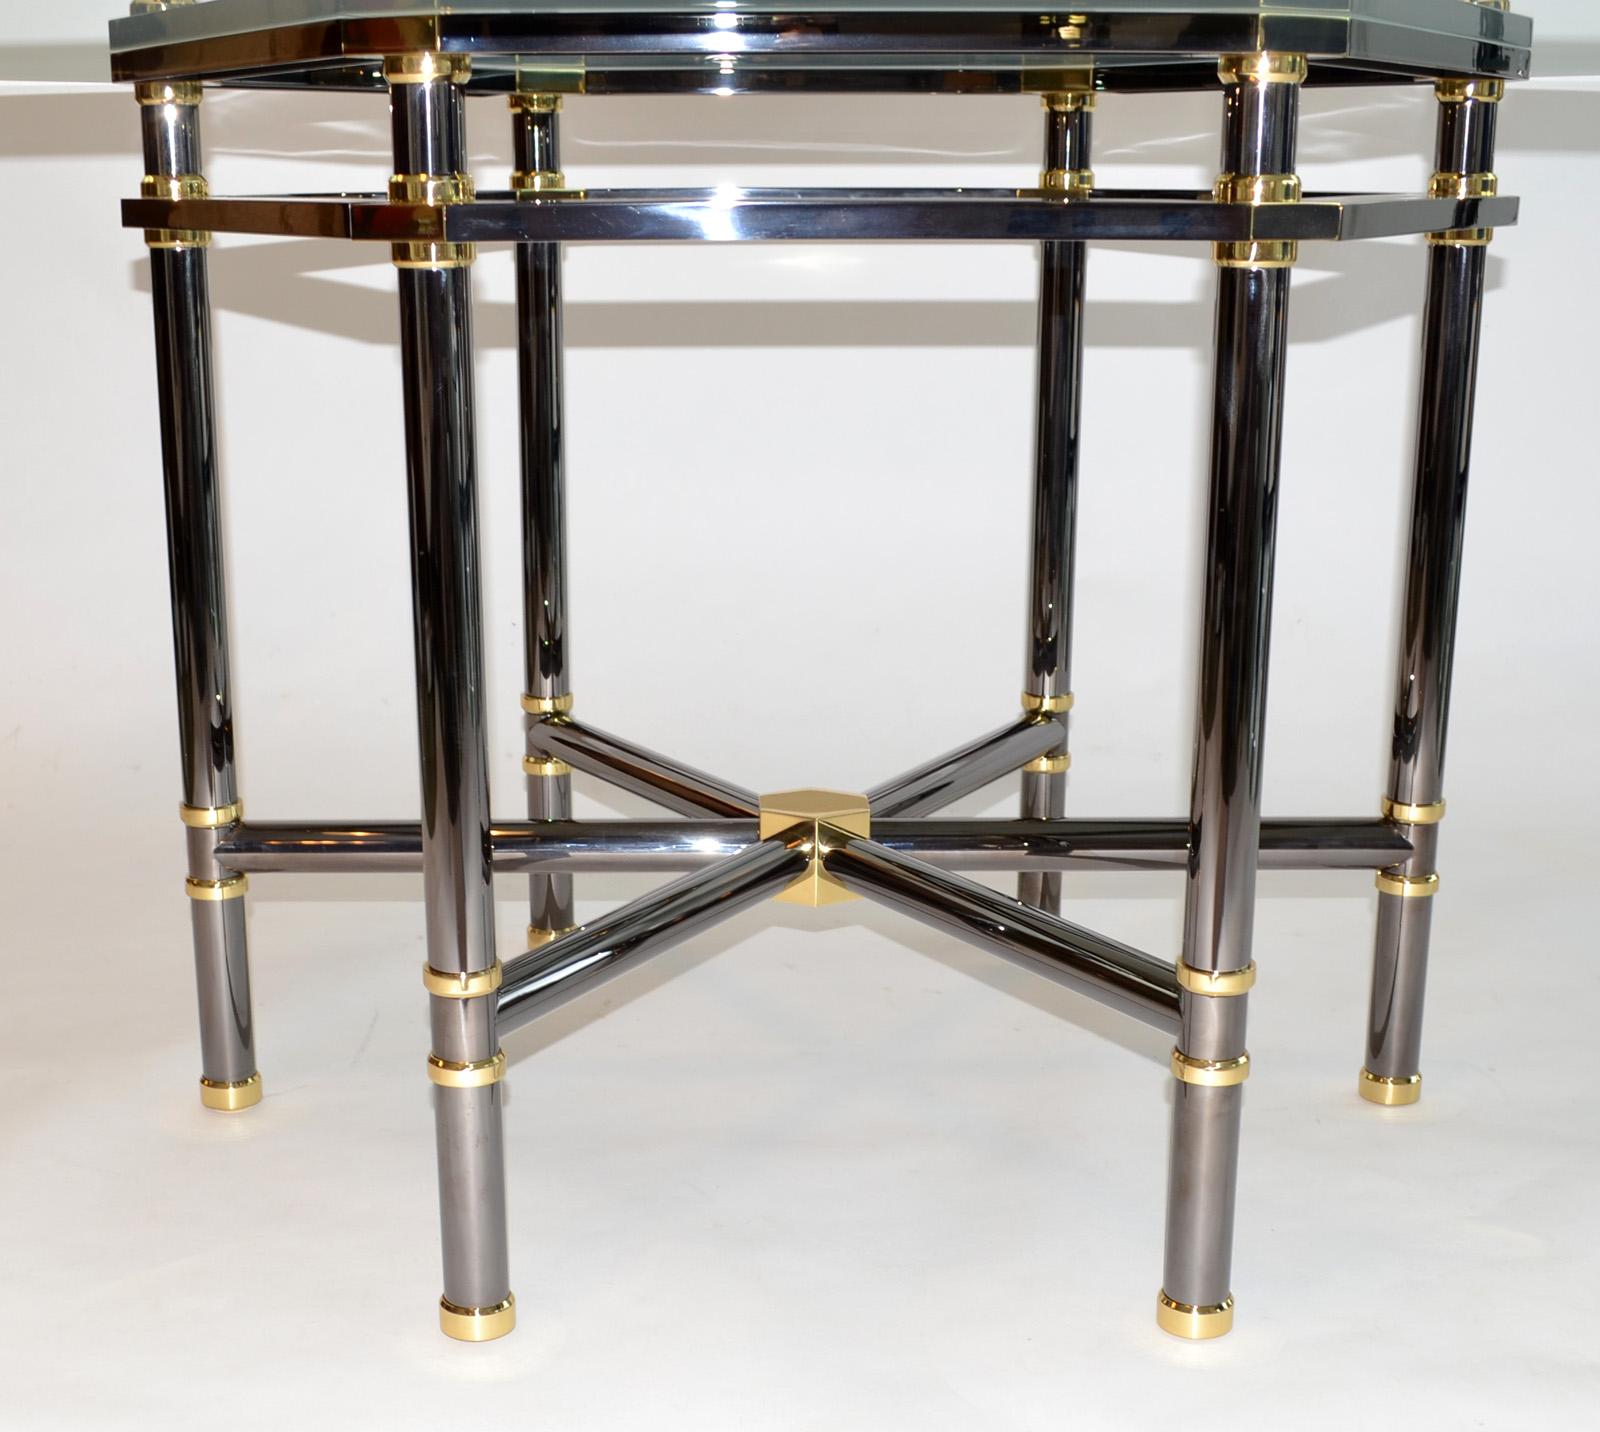 Karl Springer Jansen Style Dining Table 1980s
This iconic 1980s piece from the renowned Karl Springer Workshop is a  masterpiece of metalworking craftsmanship. The striking wagon wheel spoked design, featuring a hexagonal 60